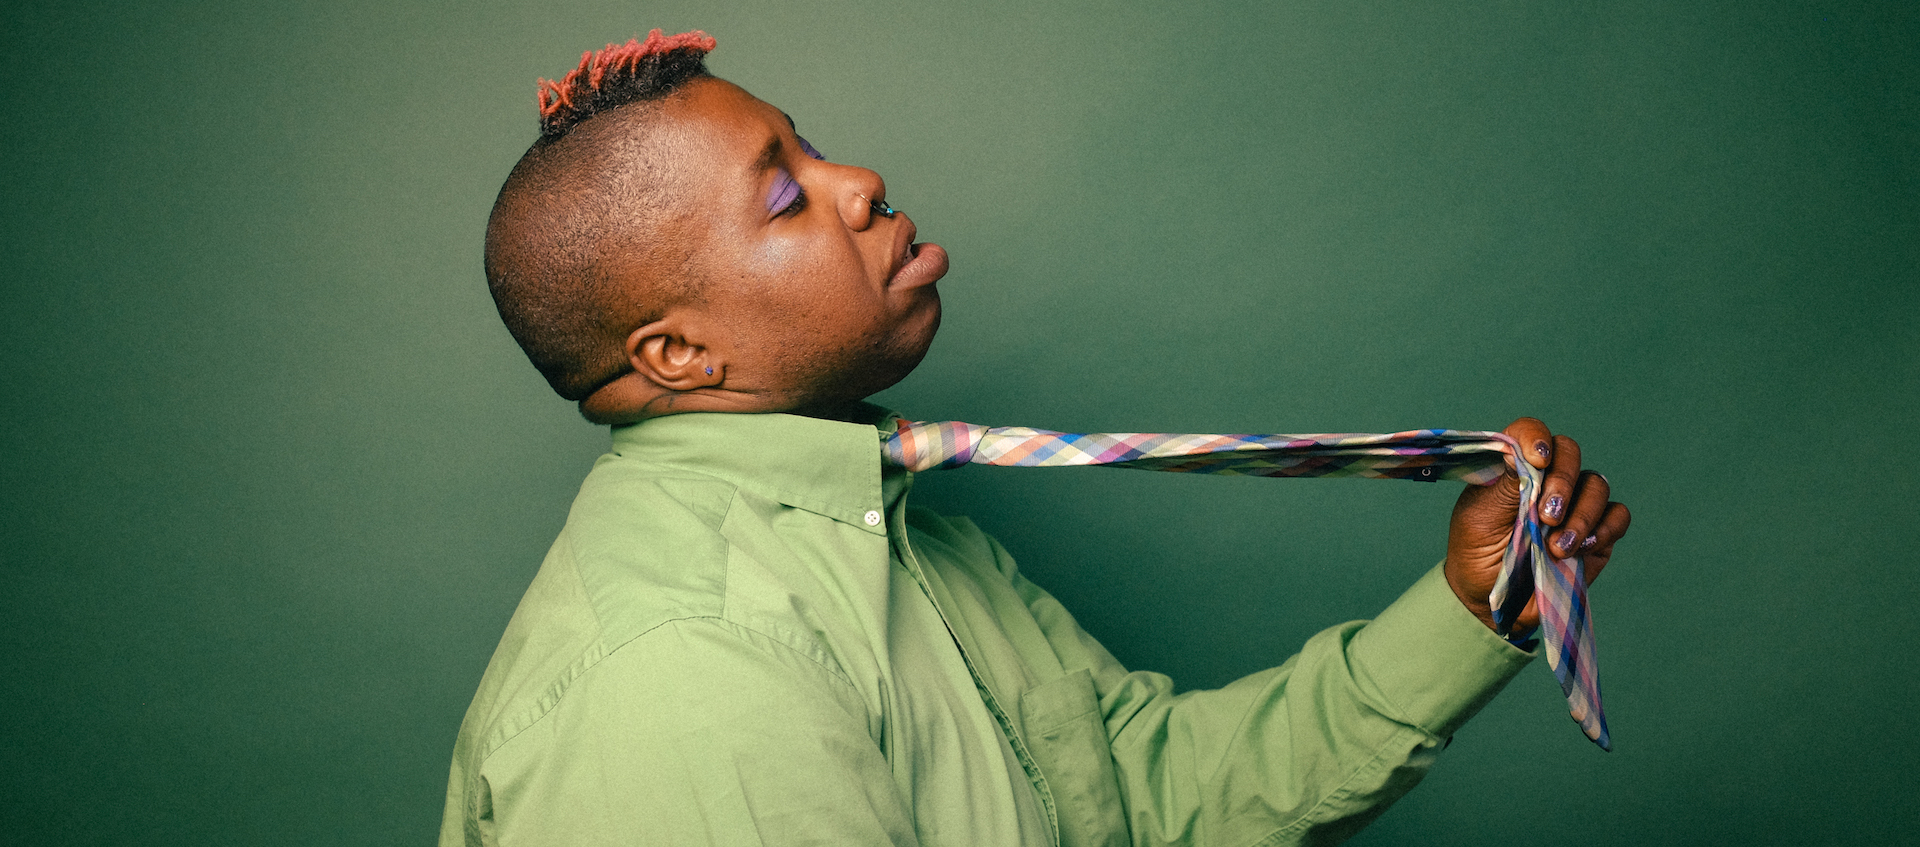 Composer and performer Sharon Udoh, an African American woman with a short colored mohawk, stands in profile against a green background, wearing a green button-down shirt and pulling on a tie around her neck